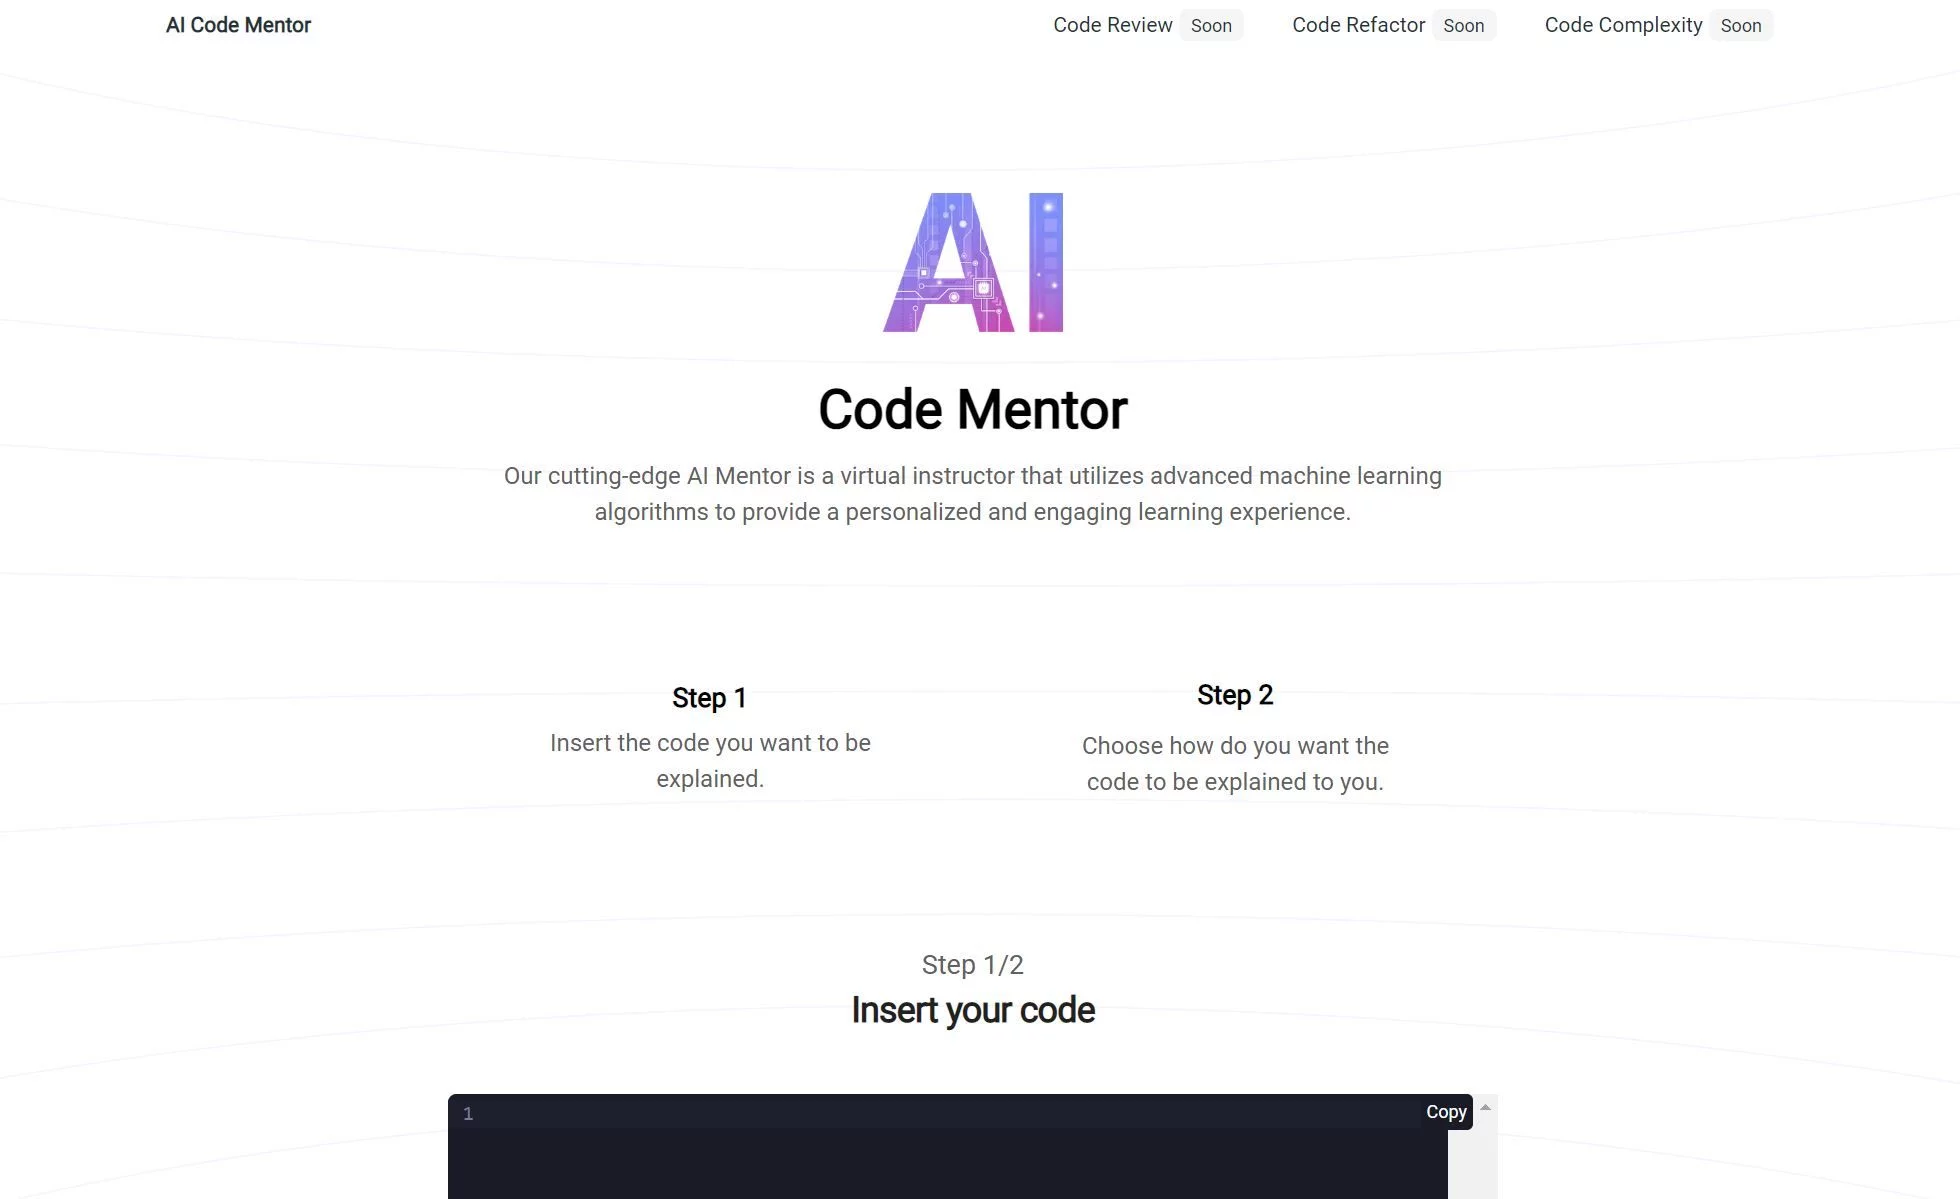  Unlock Your Coding Potential with AI Code Mentor